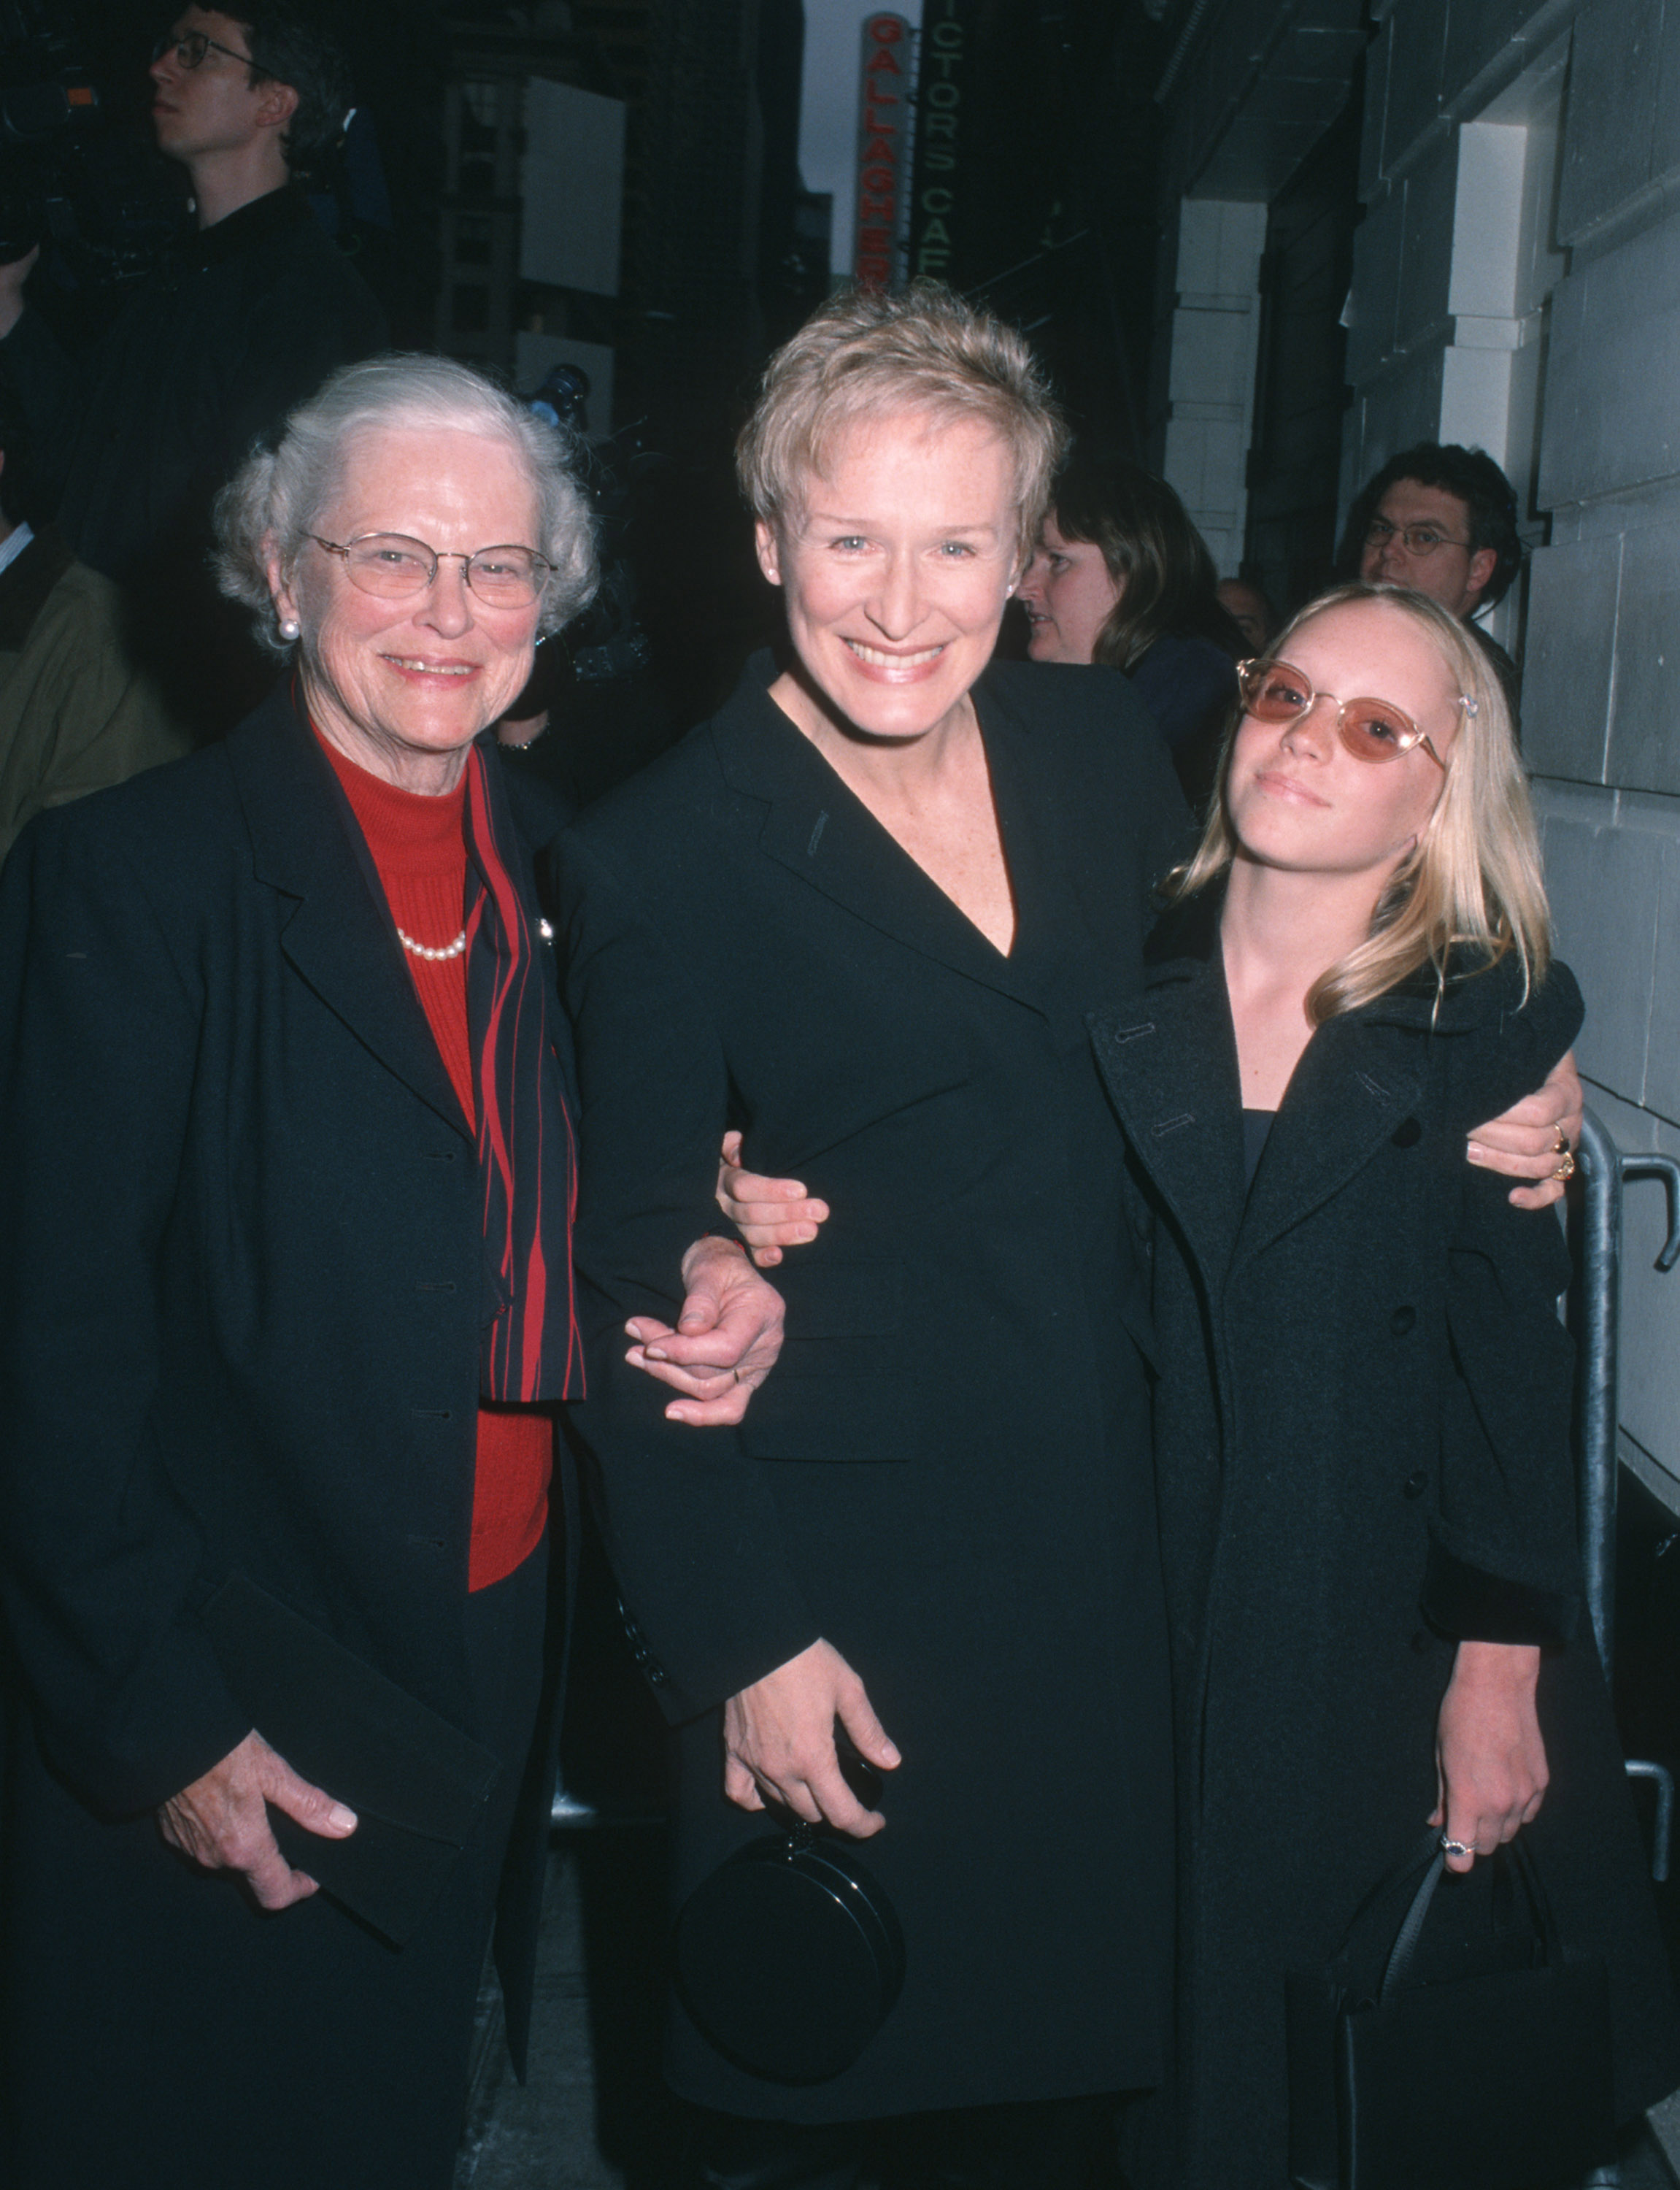 Glenn Close, Bettine Moore Close, and Annie Starke during the opening night of "The Music Man" in New York City on April 27, 2000 | Source: Getty Images